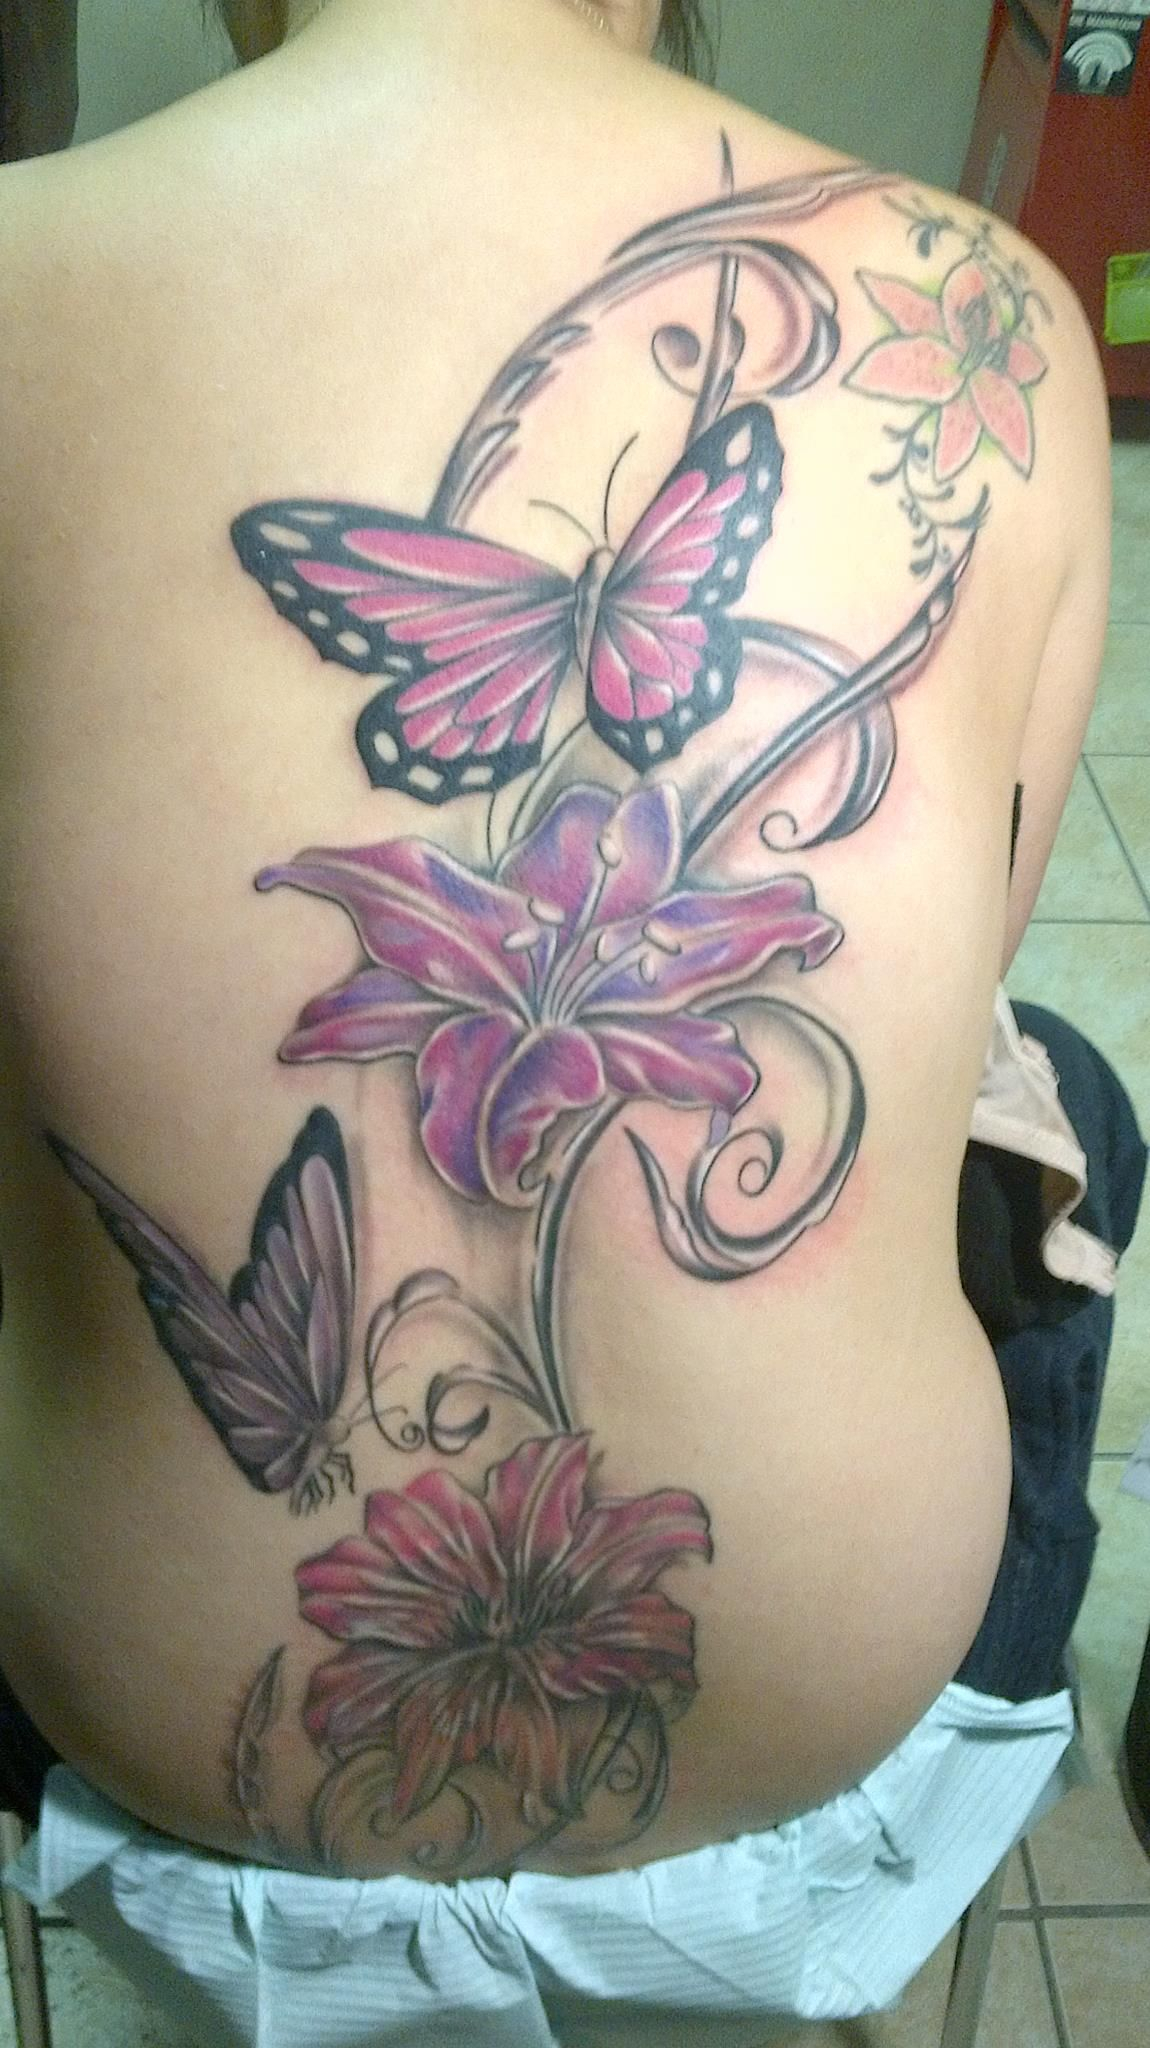 Flower Vine Butterfly Tattoothisbut My Arm Tattoo Ideas for dimensions 1150 X 2048